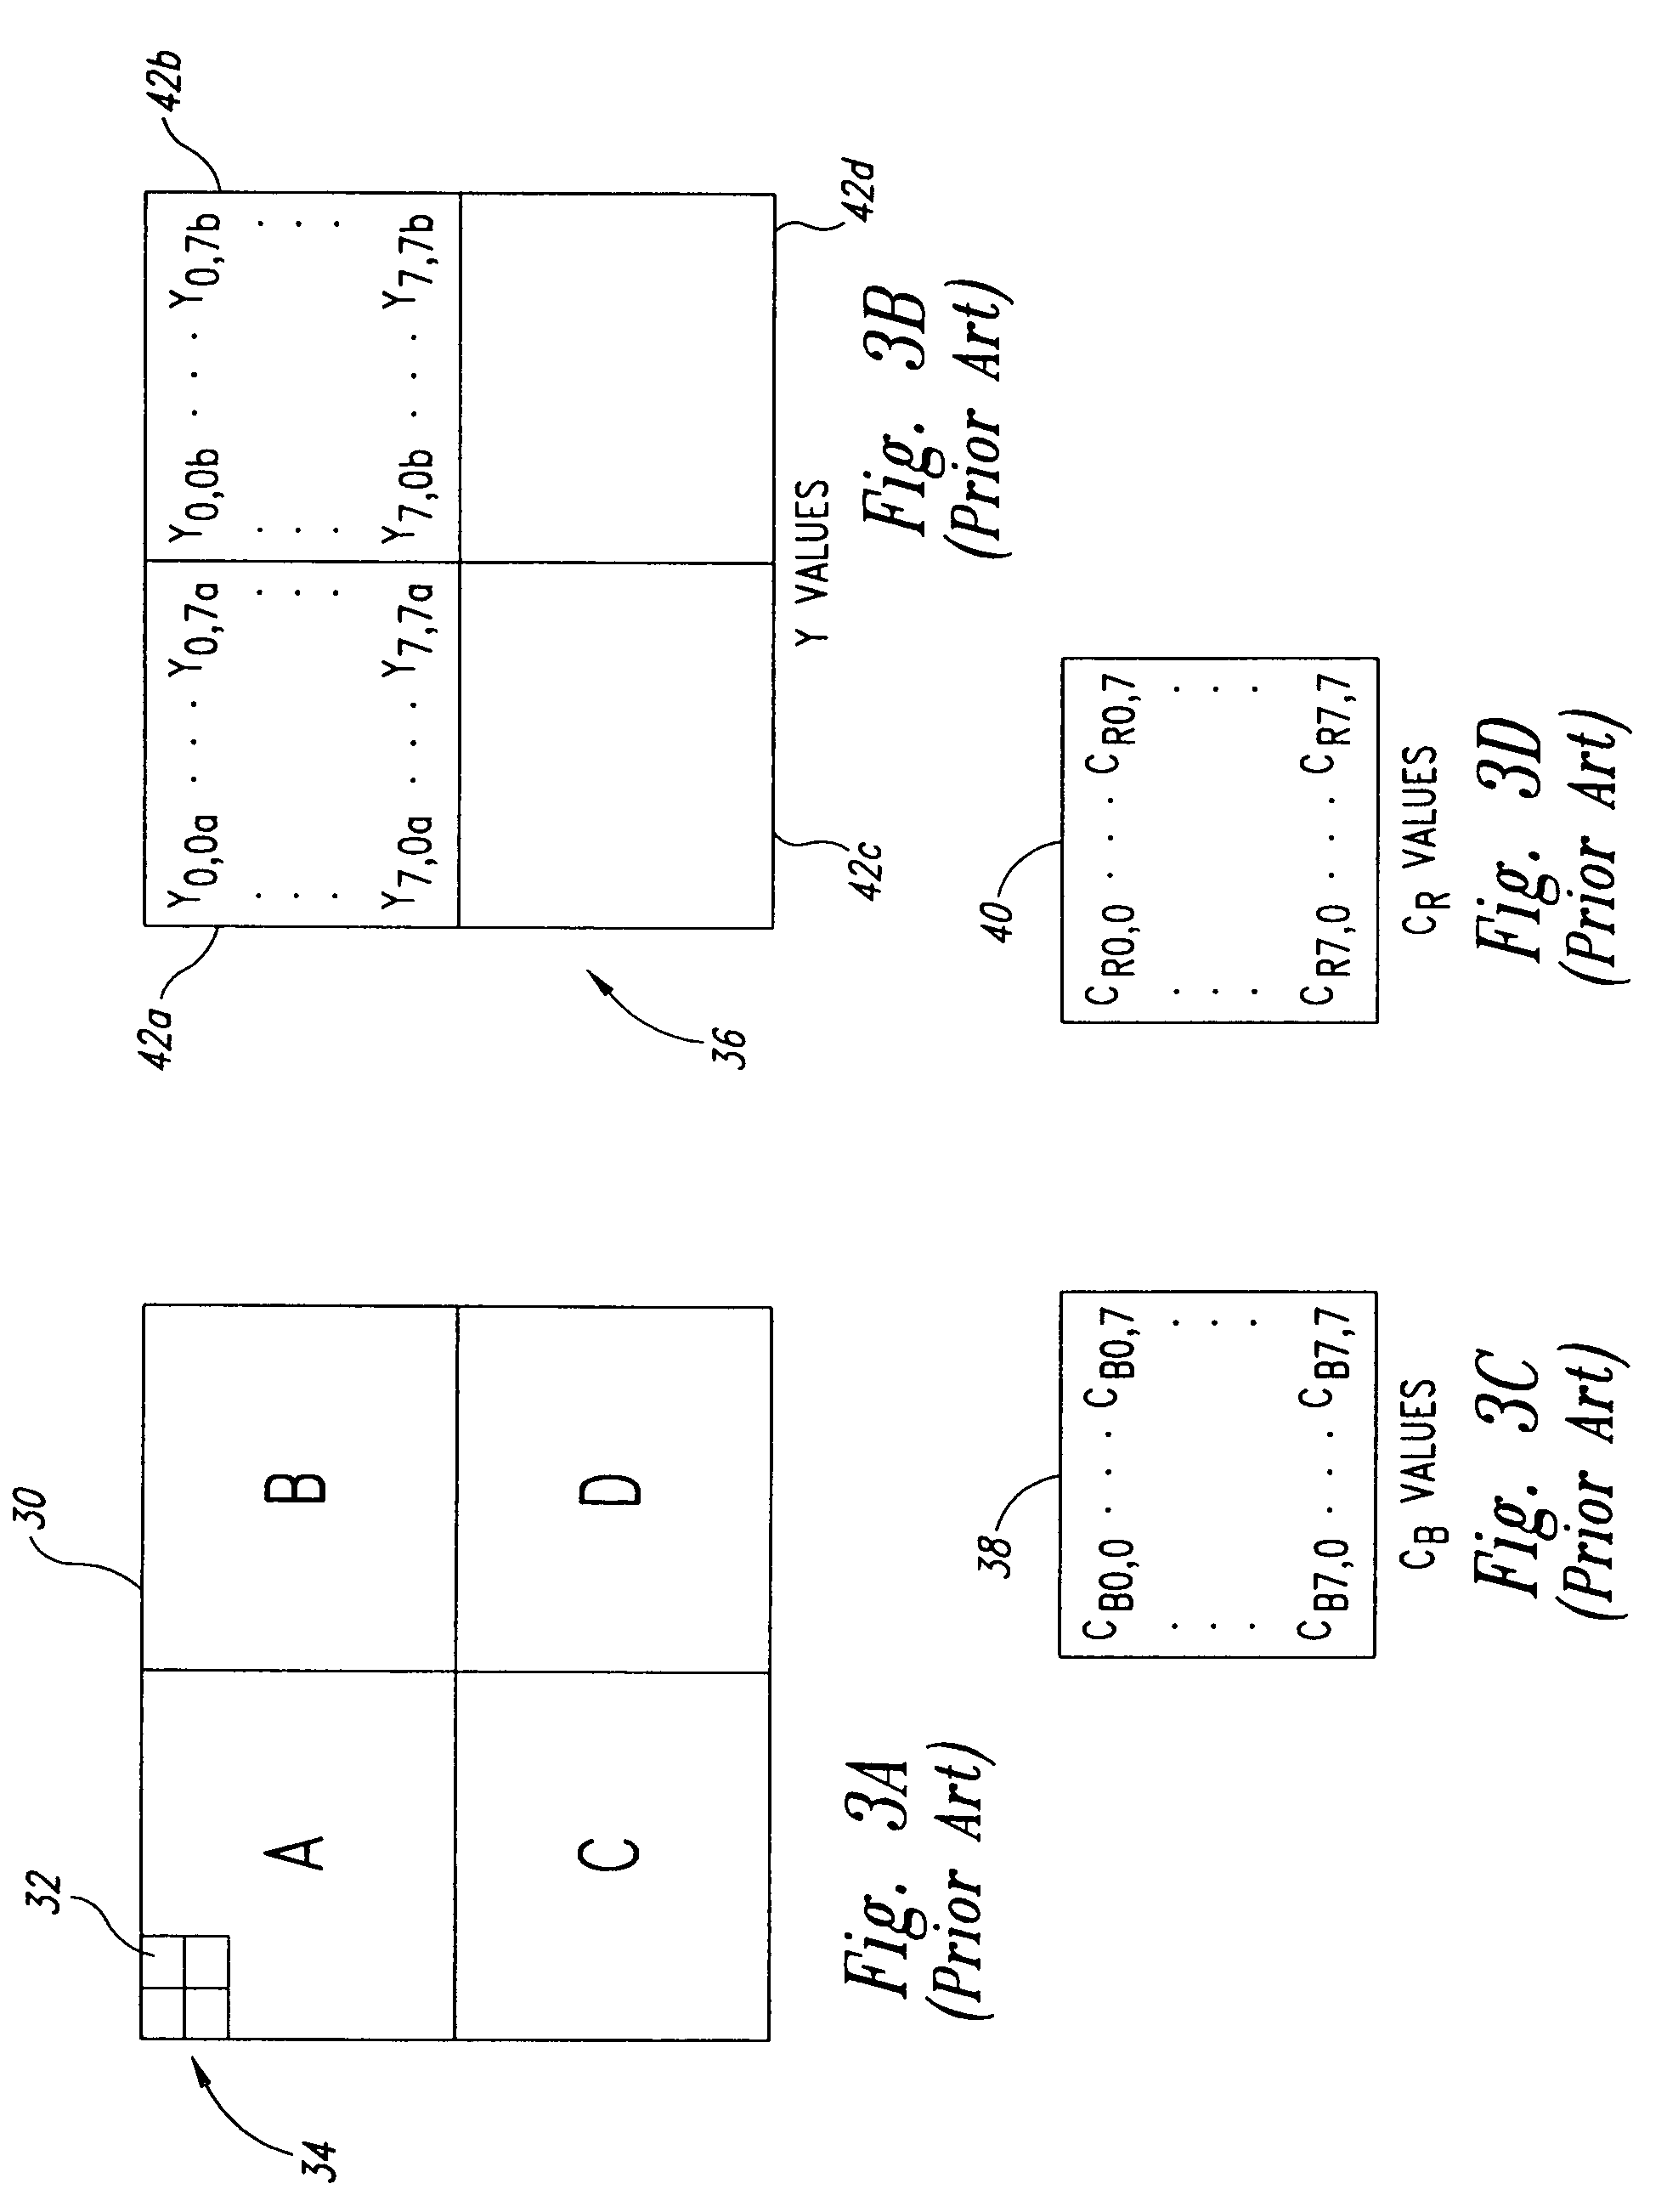 Circuit and method for modifying a region of an encoded image